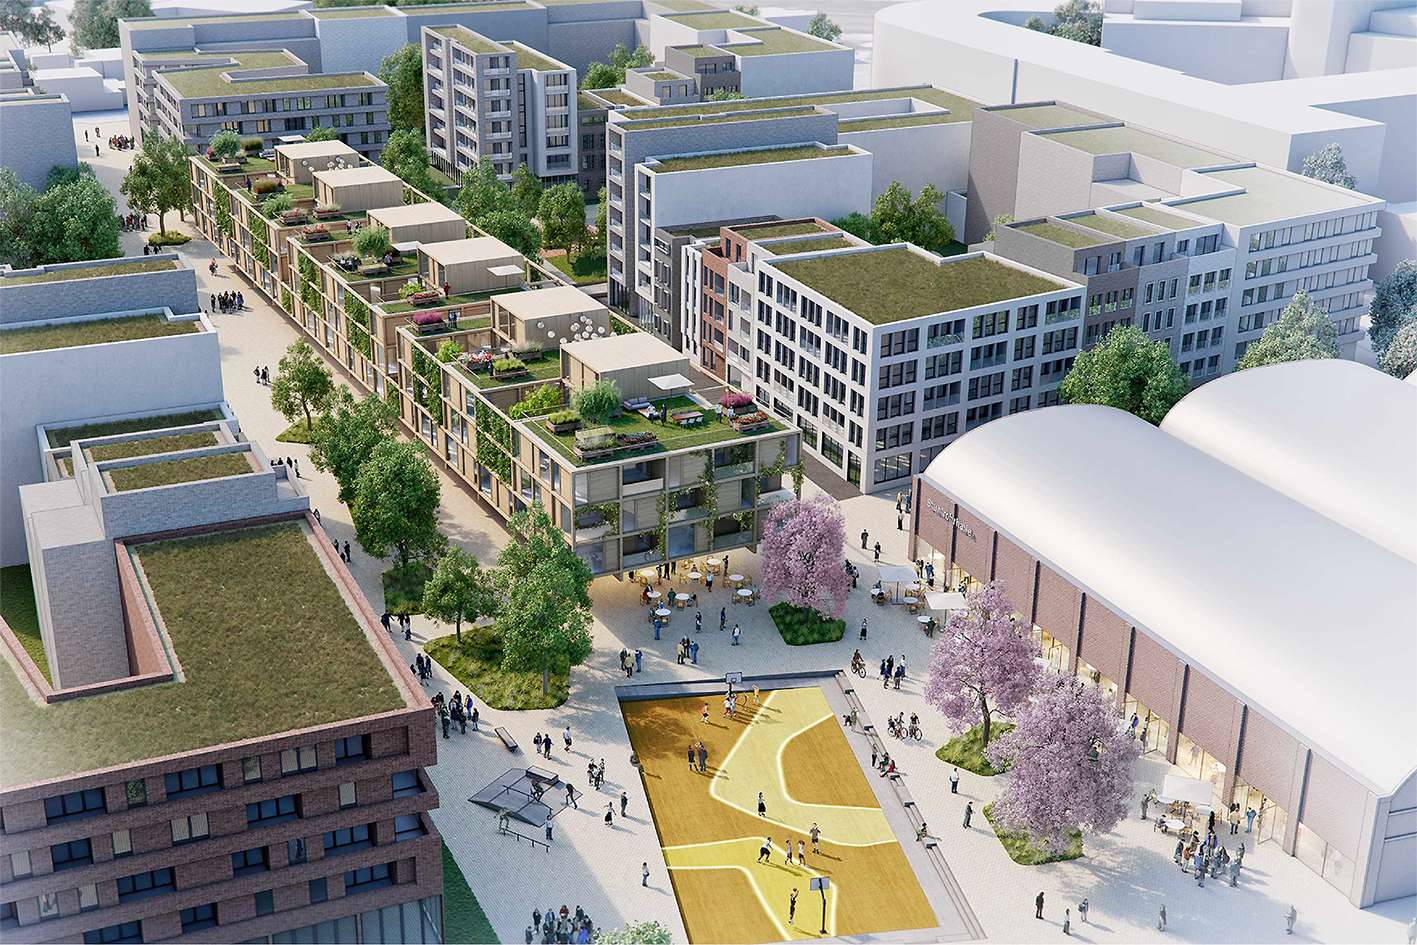 Visualization of the new building project Stuhlrohrquartier in Hamburg